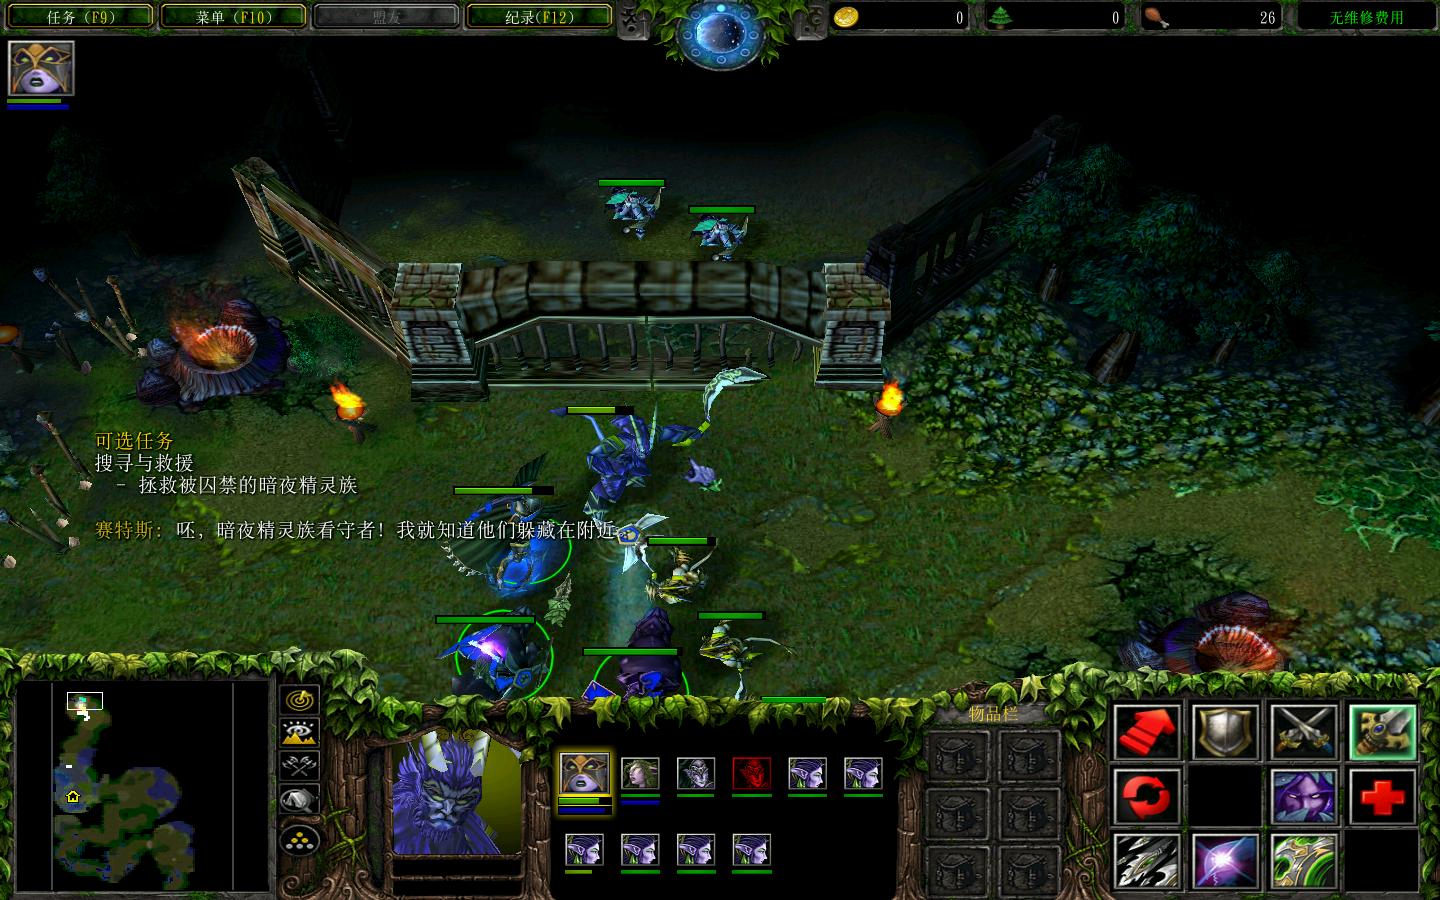 ħ3Warcraft III The Frozen Thronev1.24 v2.0.3ʽ